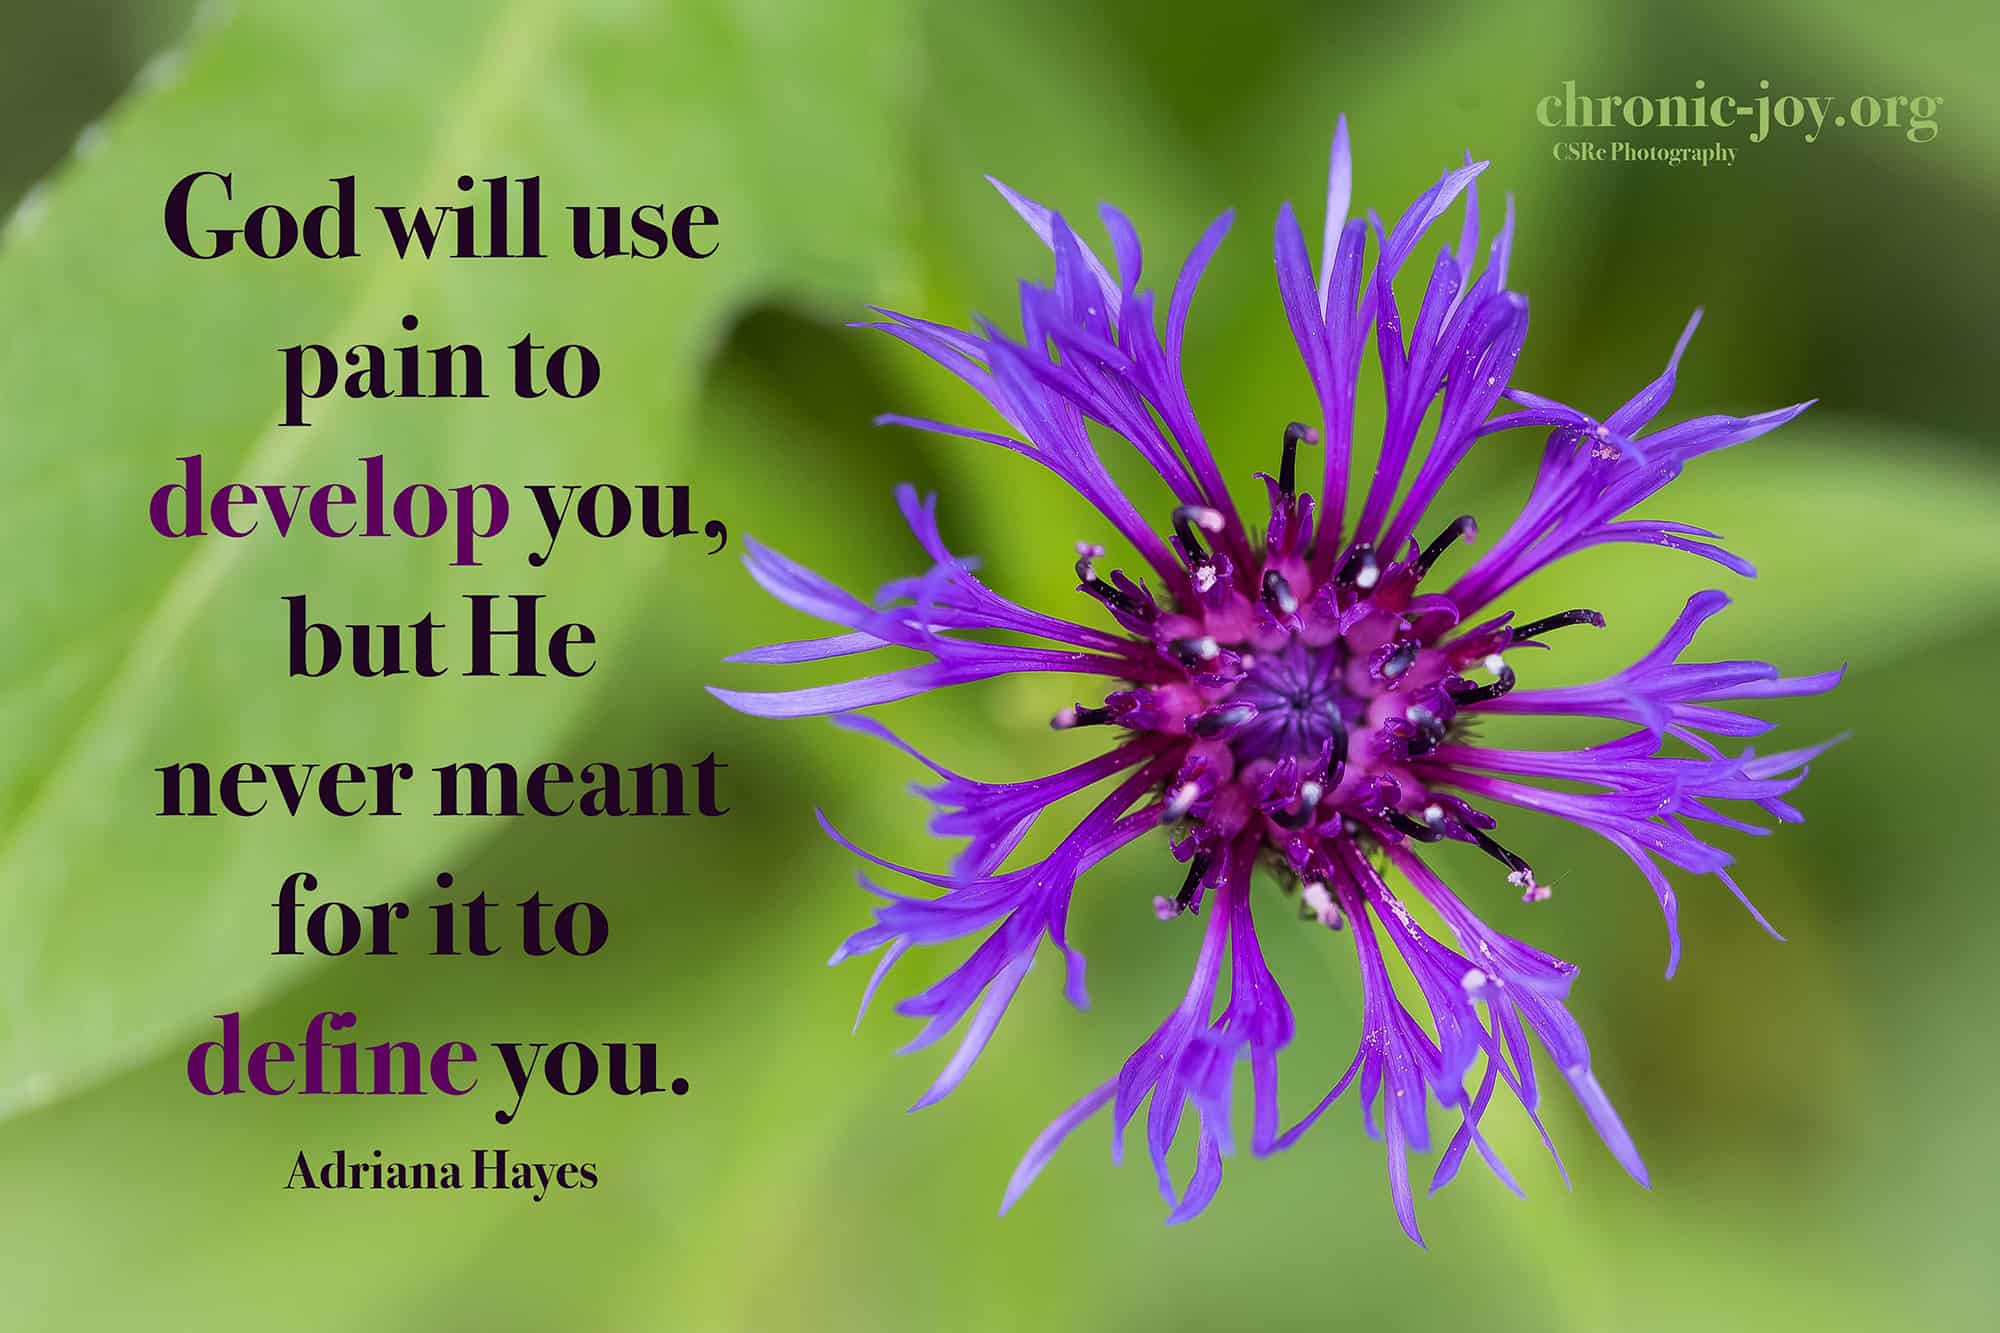 "God will use pain to develop you, but He never meant for it to define you." Adriana Hayes